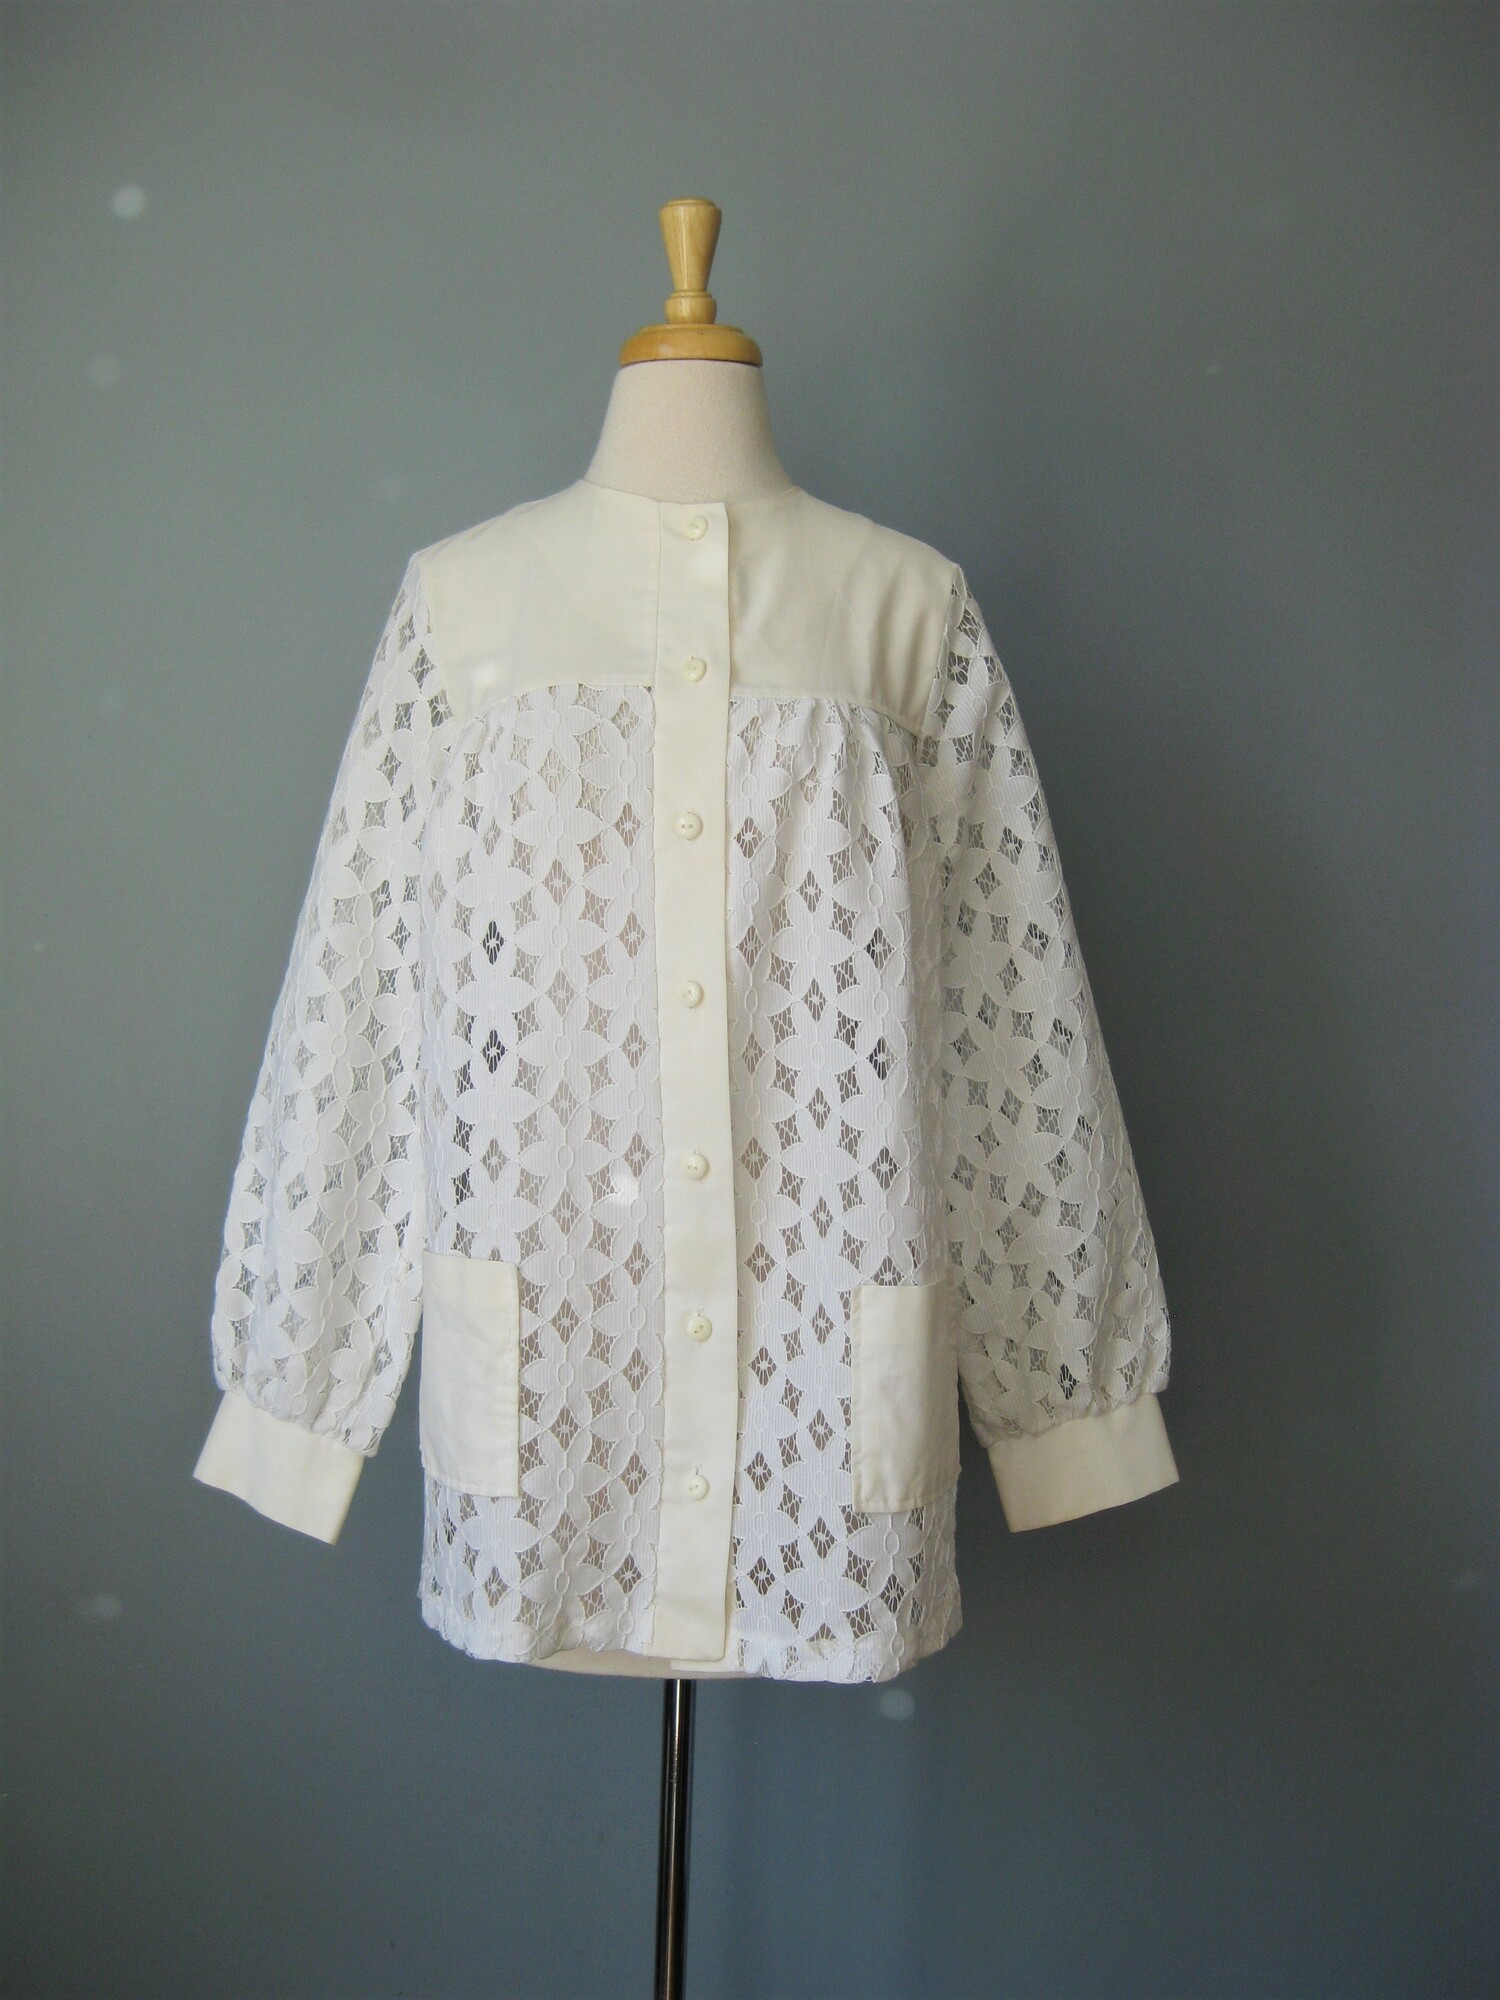 This white lace blouse from the 1960s is so feminine.
It might even be a maternity top with it's swingy shape.
The front and sleeves are unlined lace
the yoke and cuffs are a thin cotton or cotton poly blend.
the lace is bright white but the yoke and cuffs have mellowed to an offwhite color.
Otherwisse in perfect condition
Buttons down the front and on the cuffs
No tags
Here are the flat measurements:
shoulder to shoulder: 14 3/4
armpit to armipt: 21 1/2
width at hem: 24
Length from neck to hem: 28 3/4

thank you for looking.
#36606